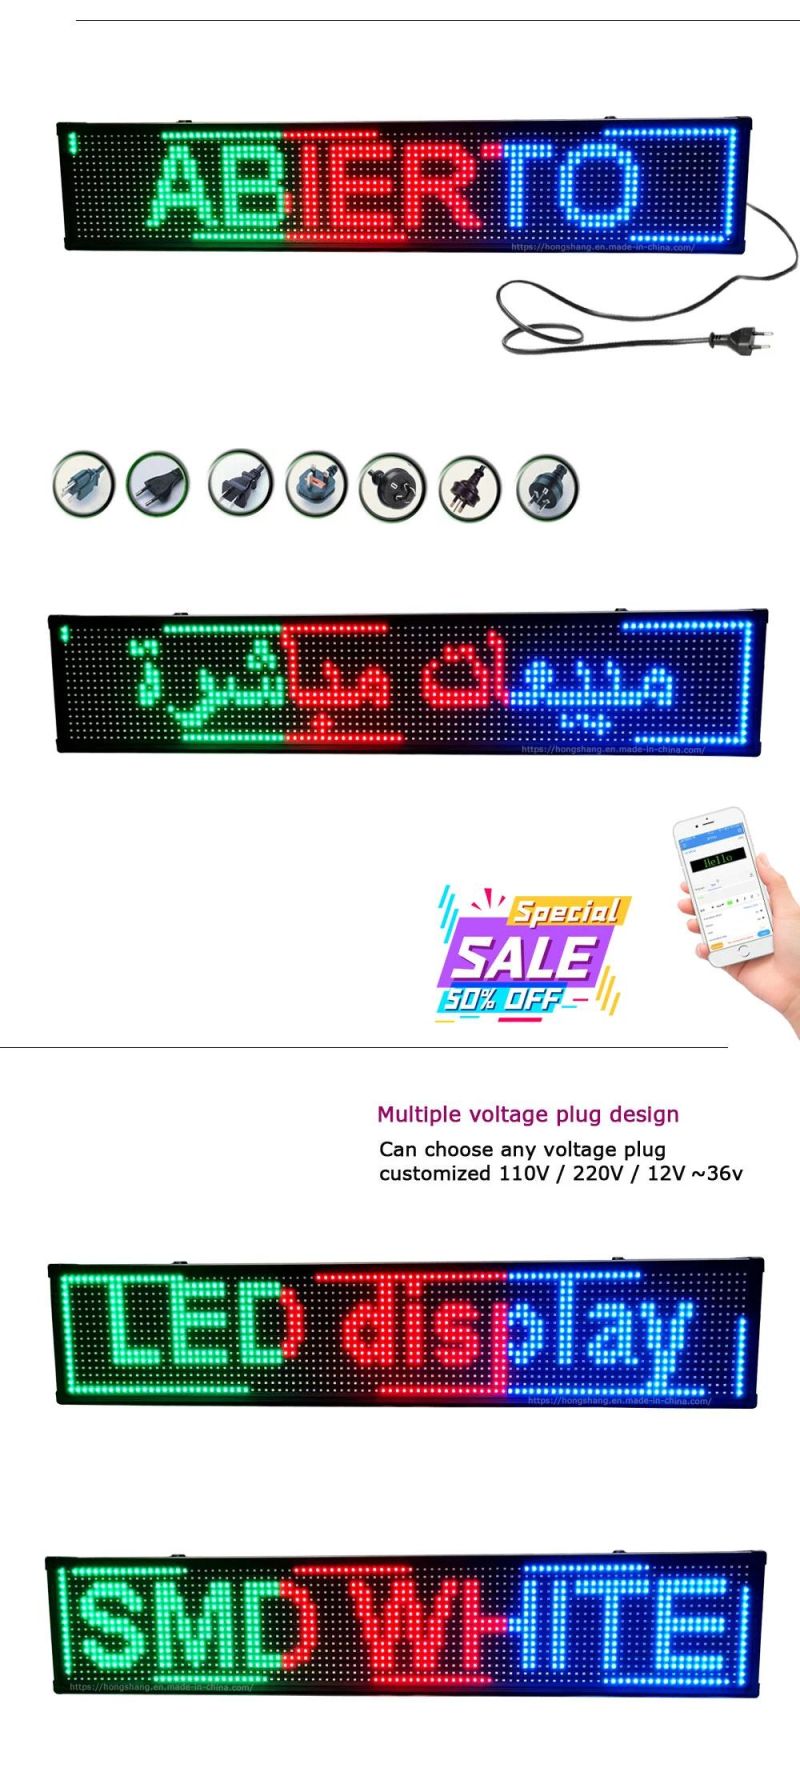 Semi-Outdoor Mixed Color Hanging Advertising Screen Text Publicity Display Board